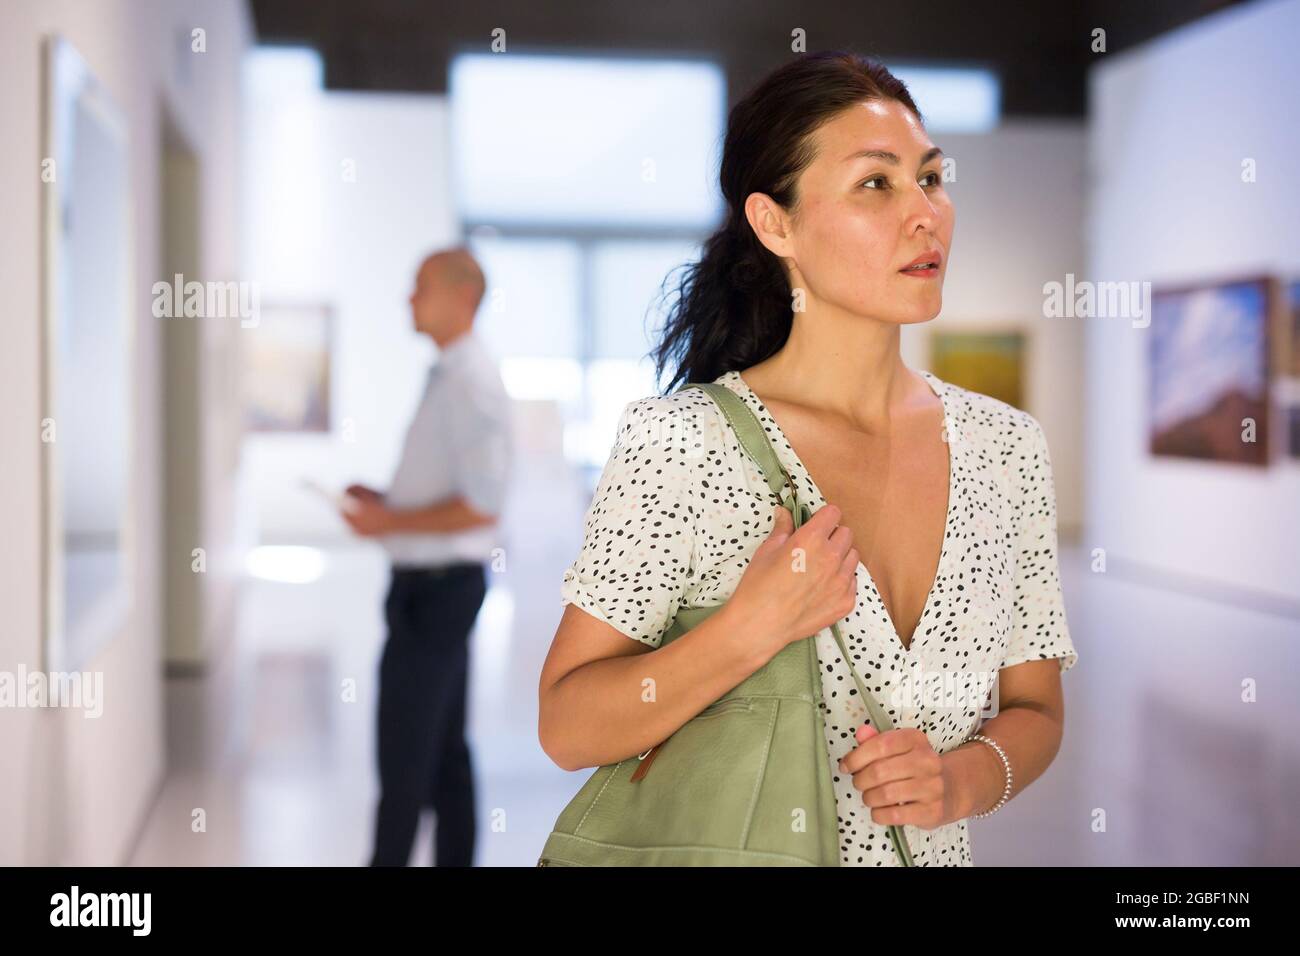 Woman standing in picture gallery Stock Photo